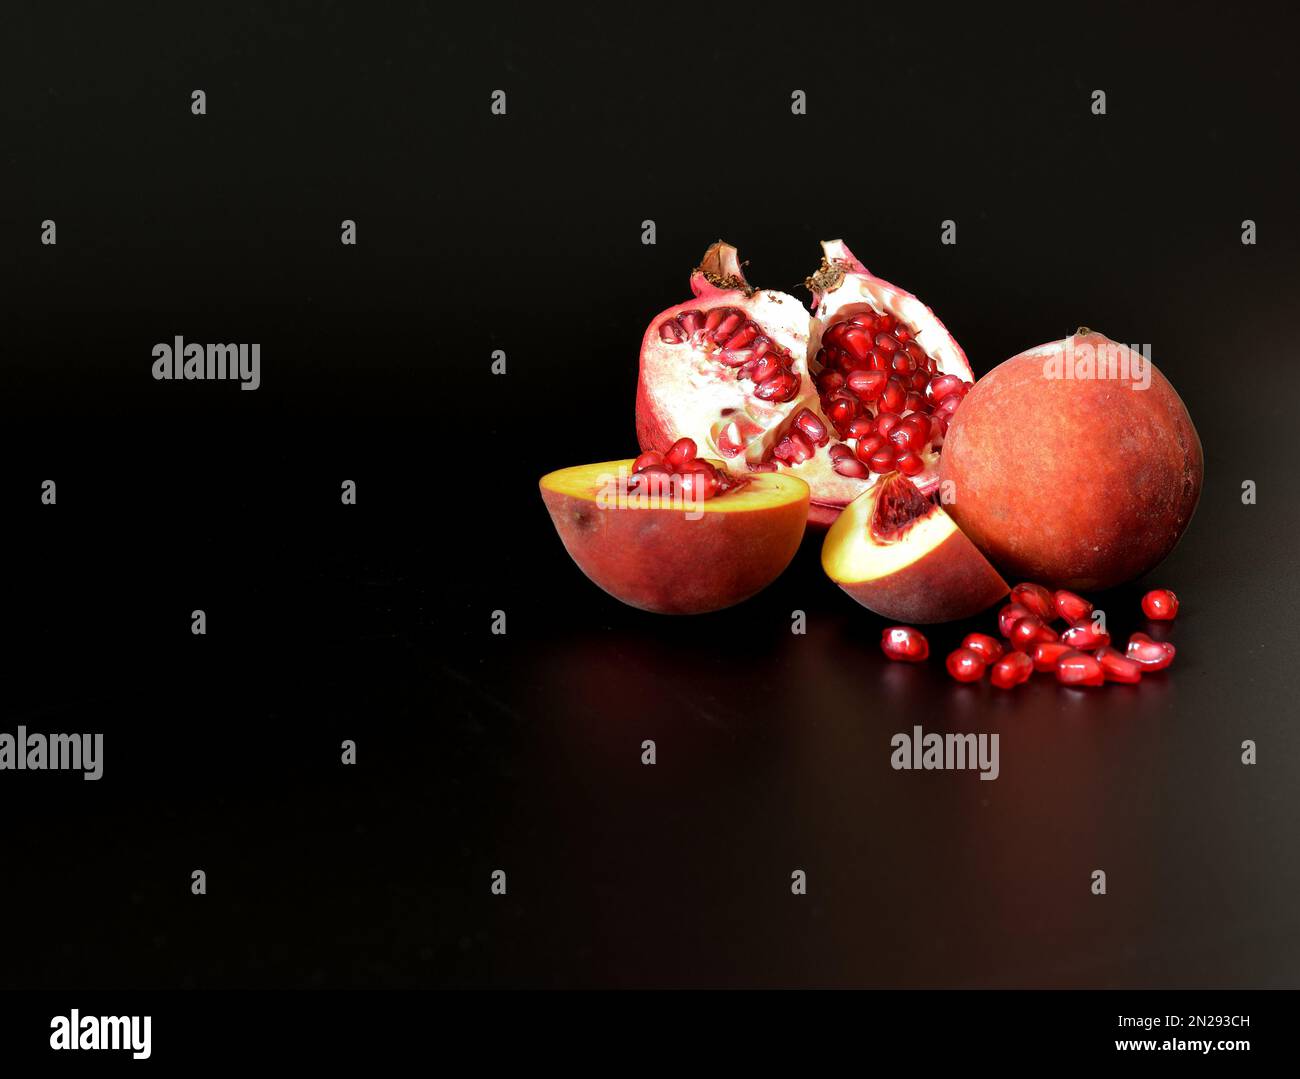 Broken pomegranate fruit with a scattering of seeds and pieces of a ripe peach on a black background. Close-up. Stock Photo